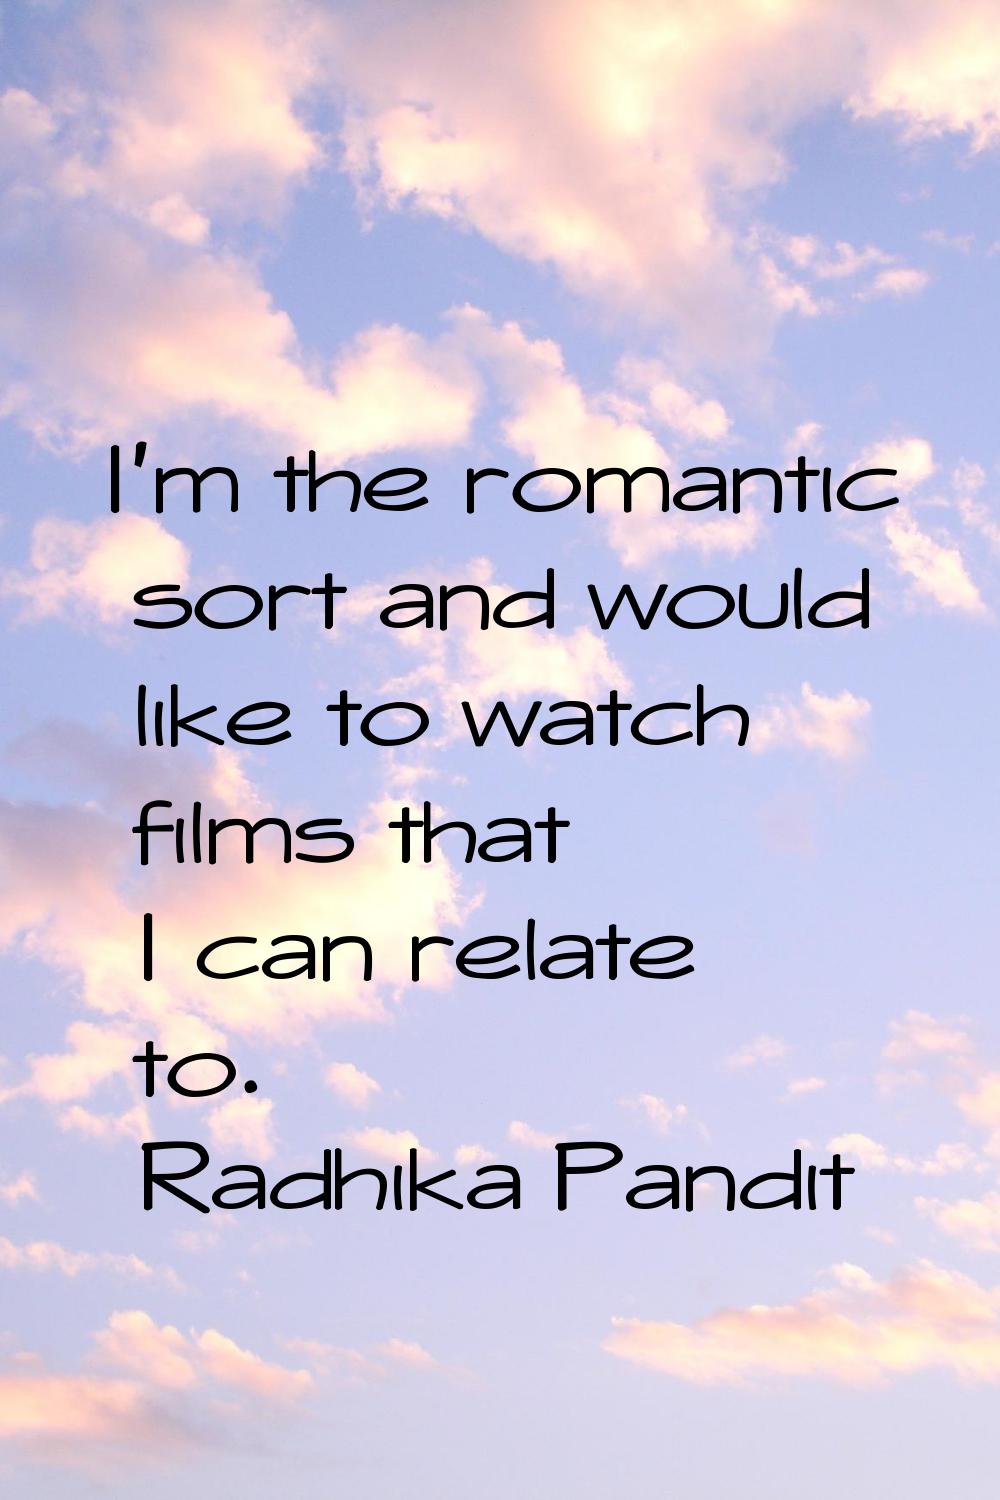 I'm the romantic sort and would like to watch films that I can relate to.